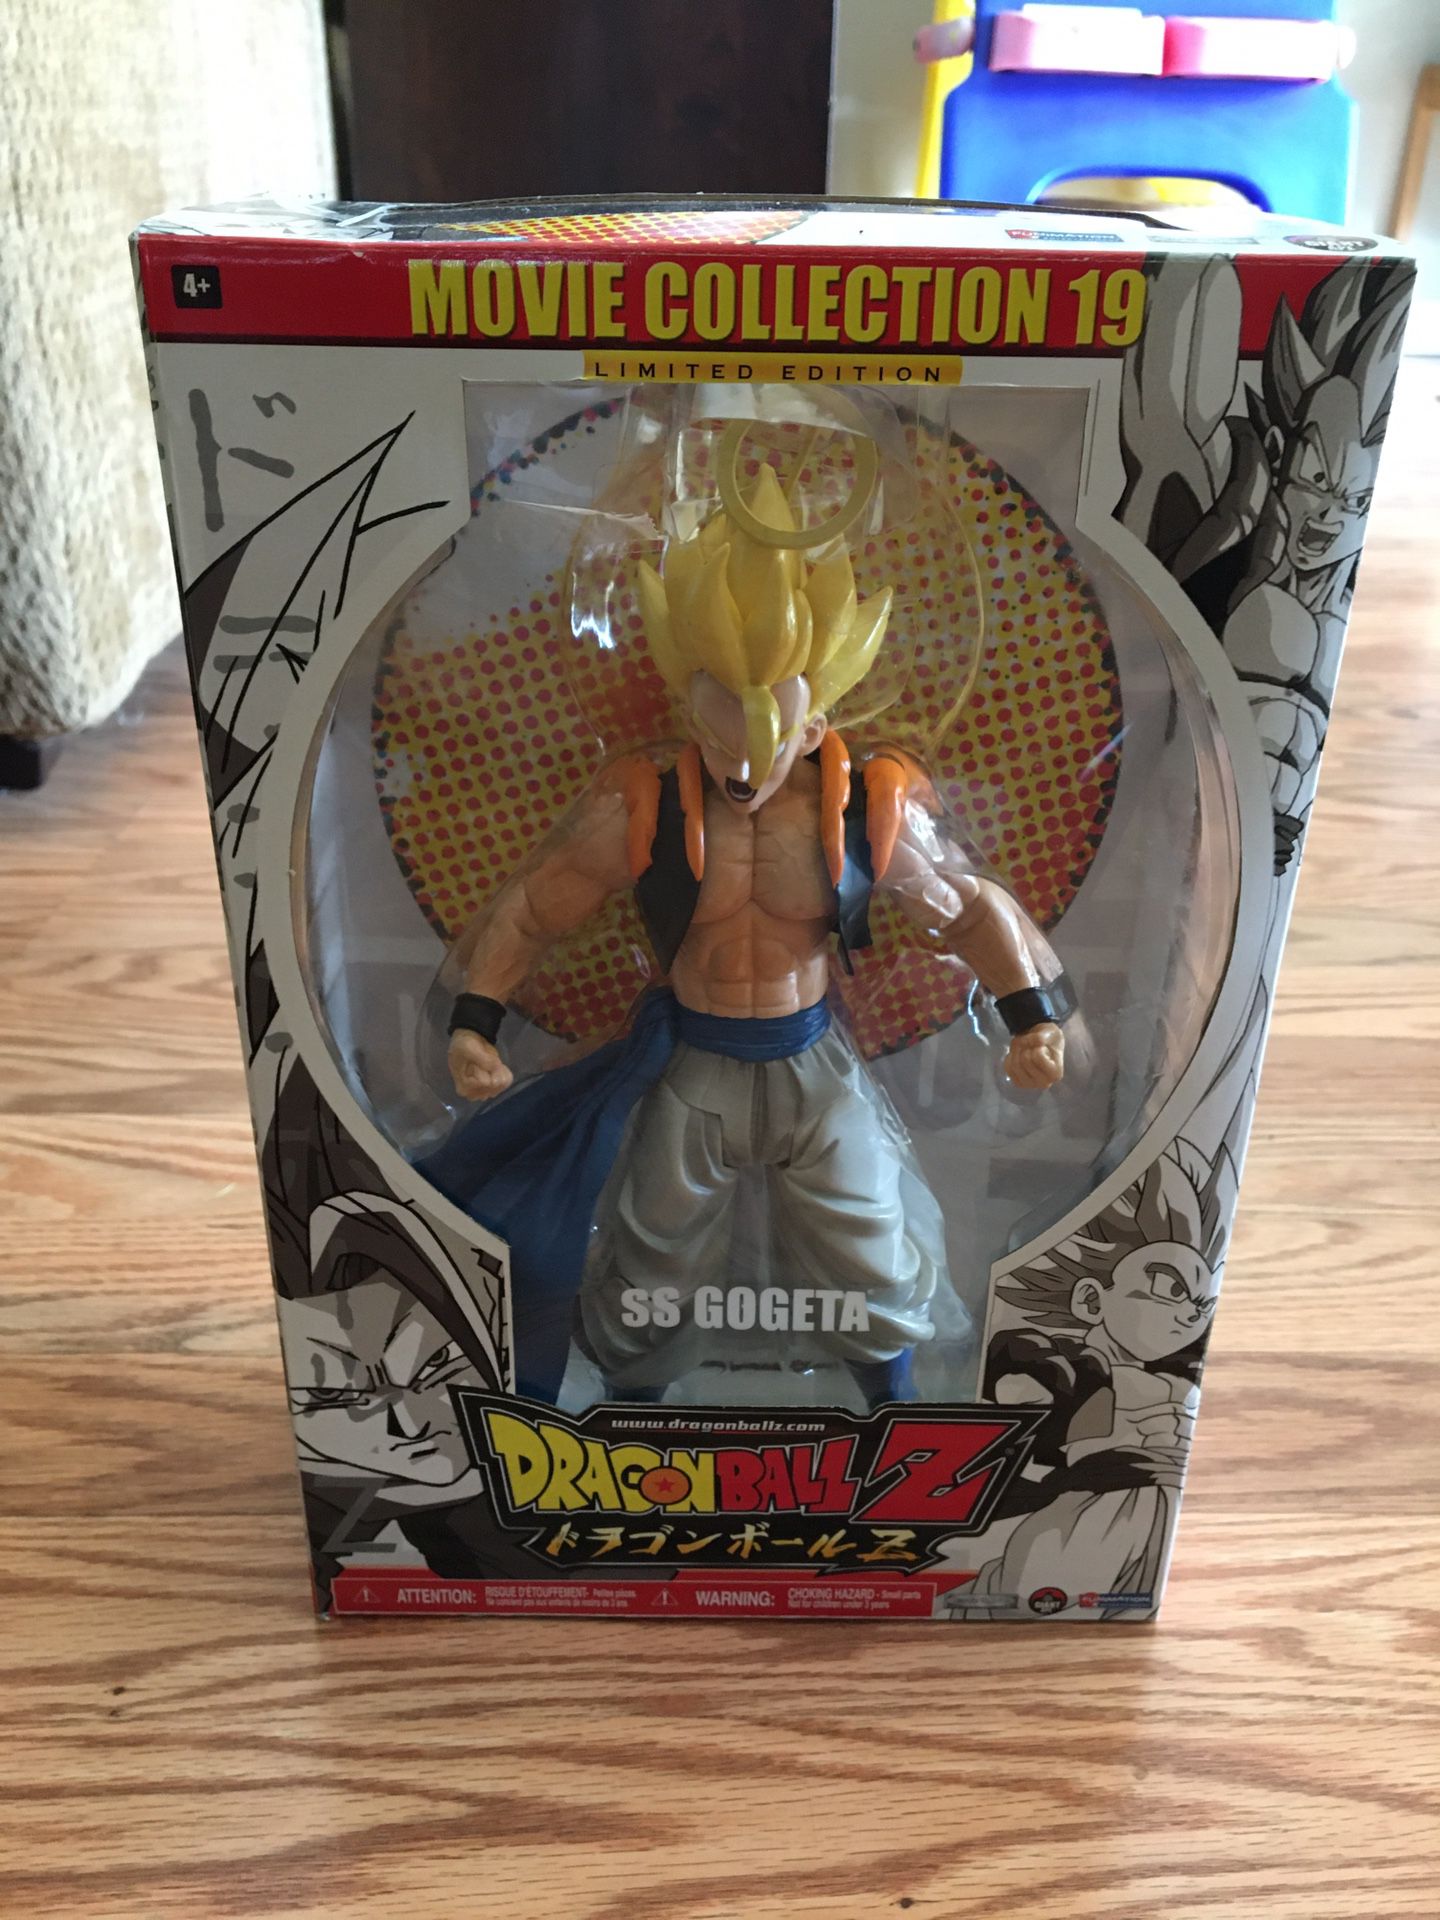 Dragonball Z Movie Collection Action Figure - SS Gogeta